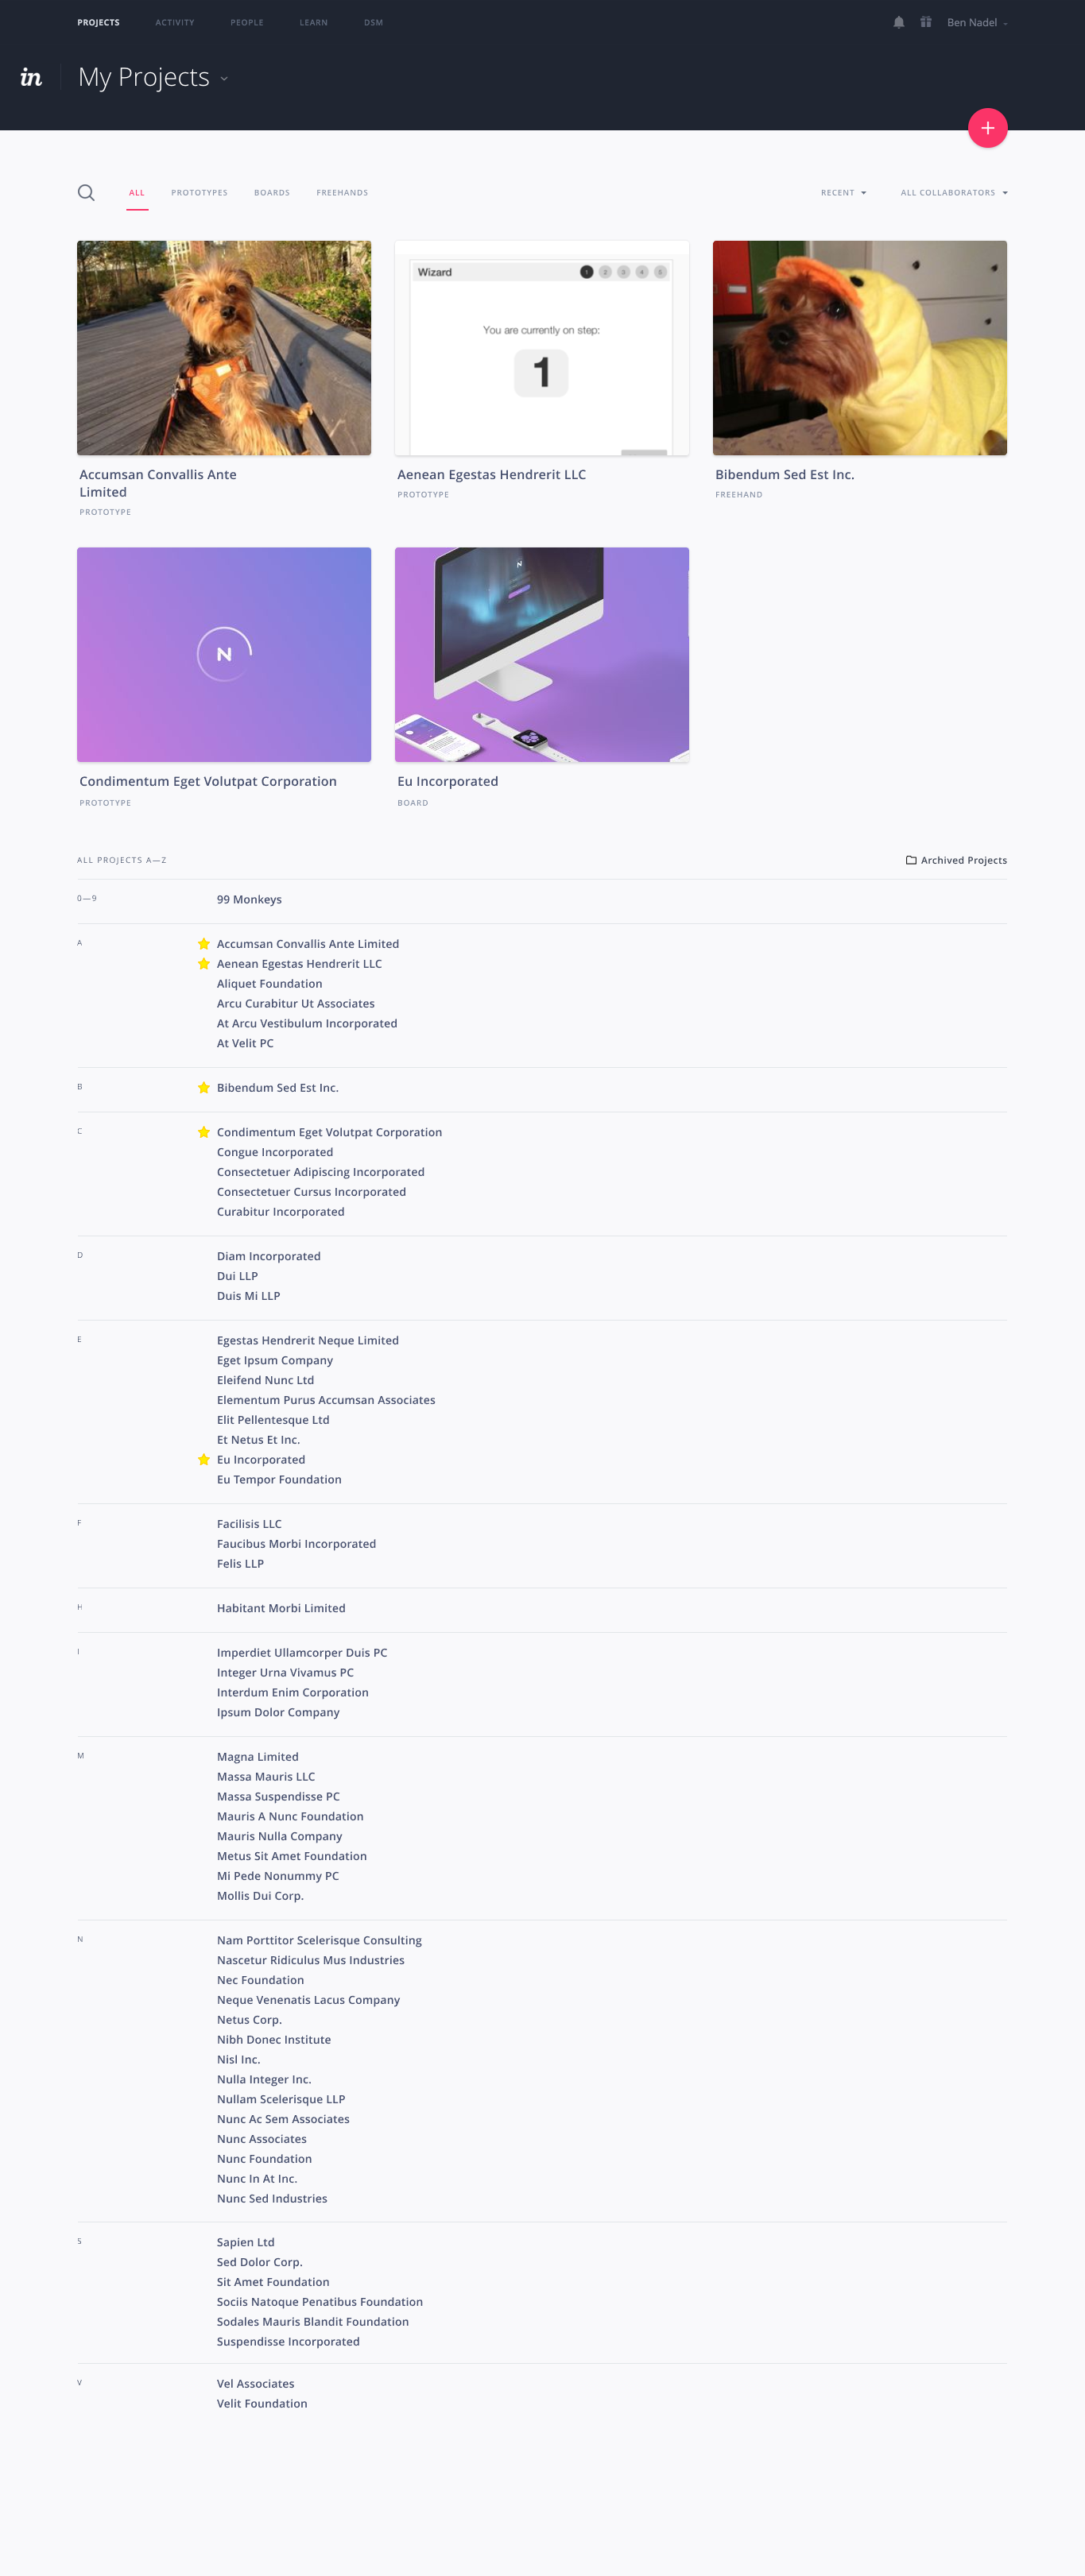 The InVision projects list re-visioned with the Basecamp projects design.